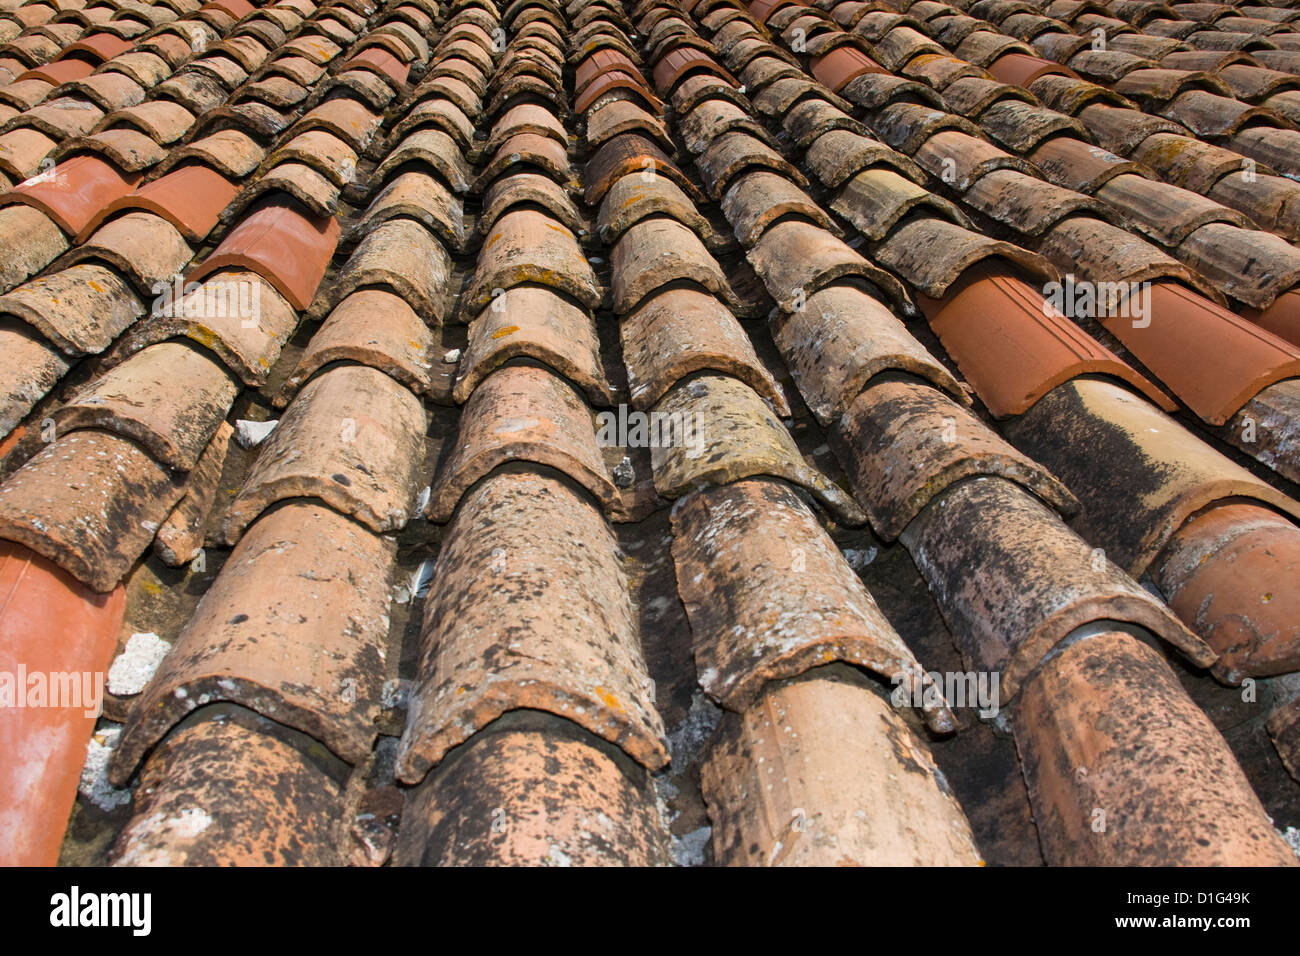 A portion of roof of old-stile bent tiles repaired with new ones Stock Photo